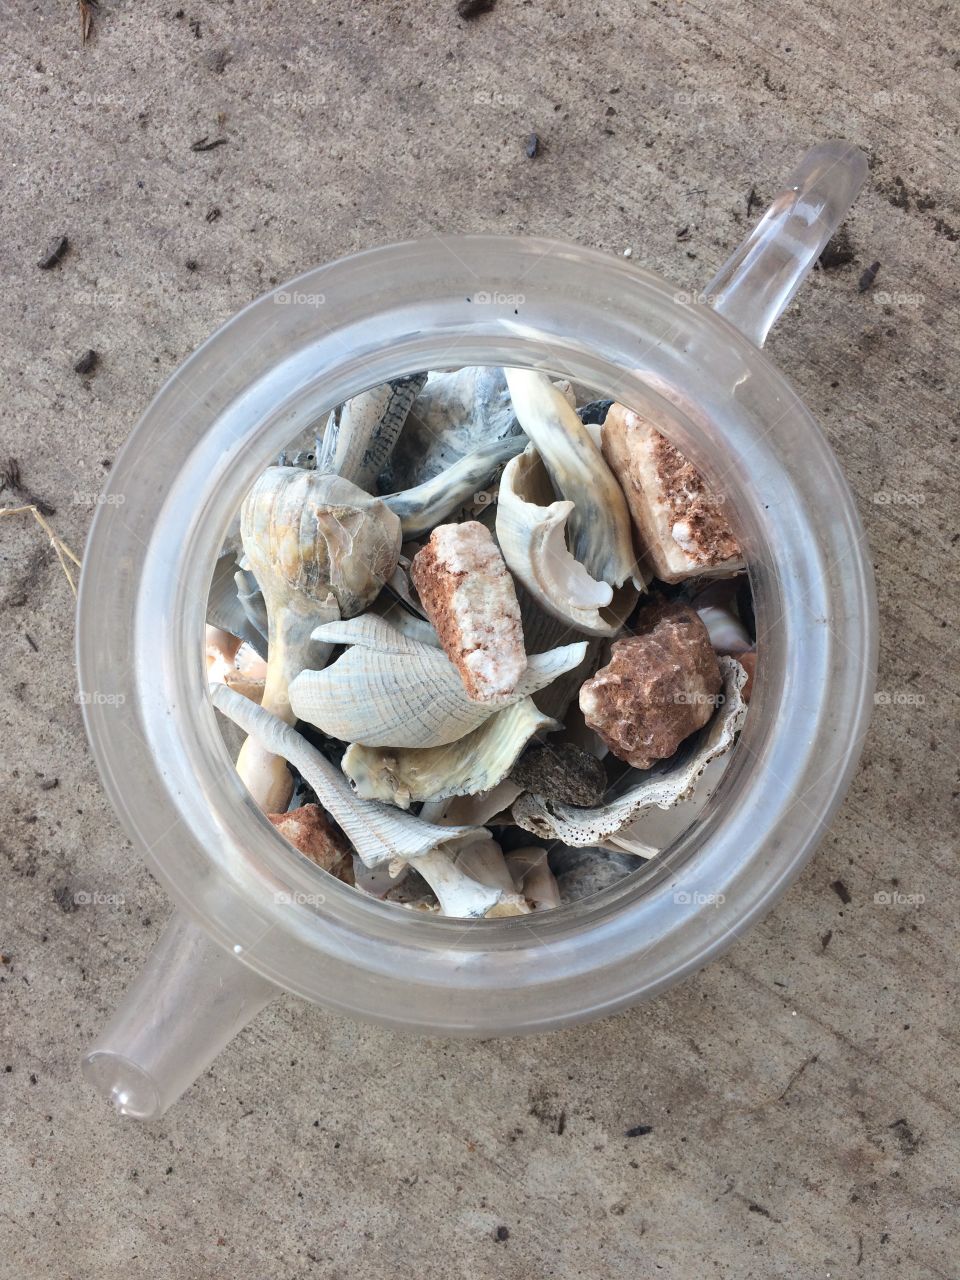 Memories in the form of seashells collected on a Texas beach trip held in a fragile glass teapot. 